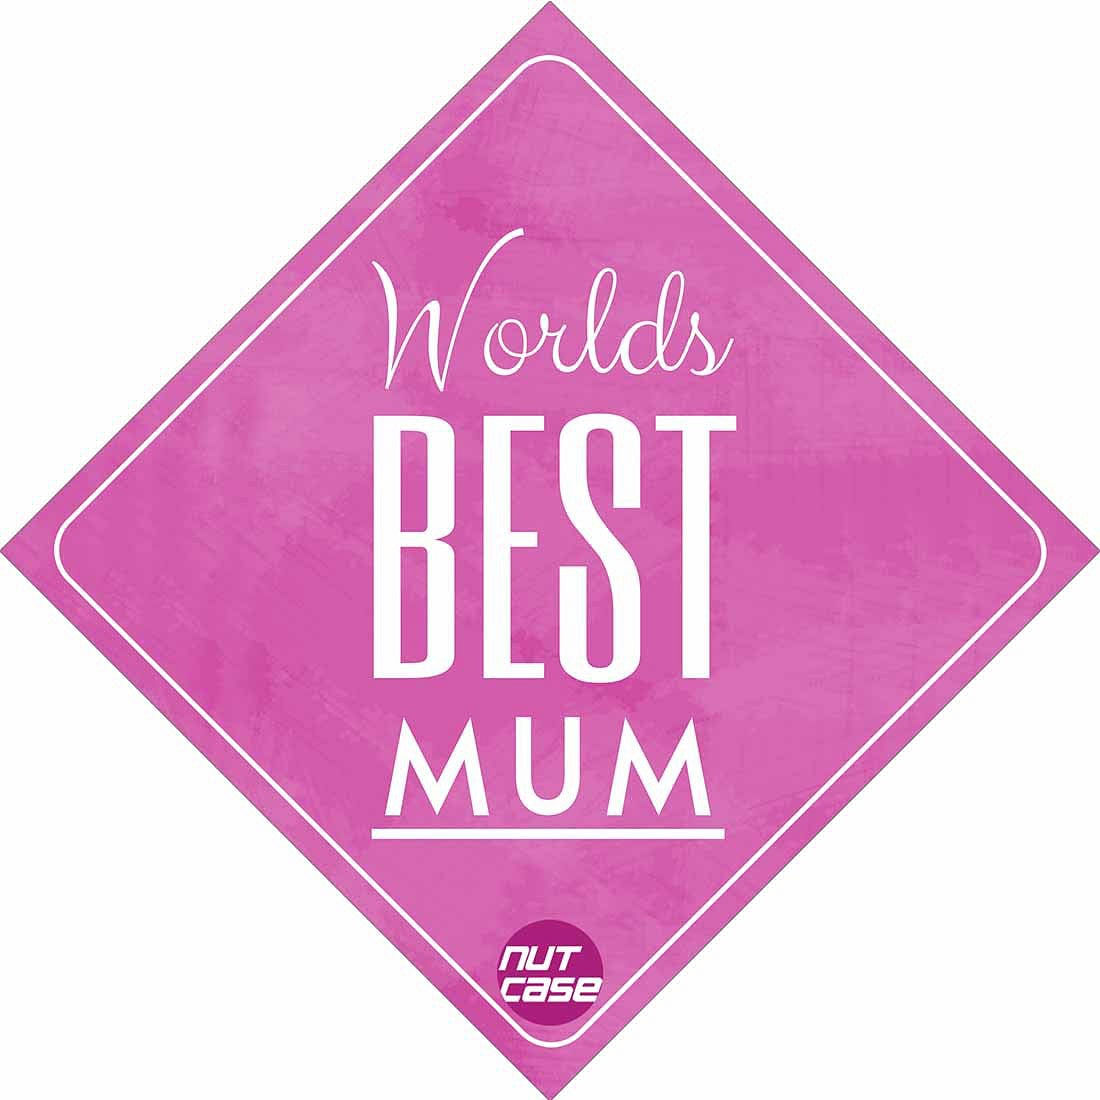 Car Sticker - Funny Mother's Day Gifts - Worlds Best Mum Nutcase